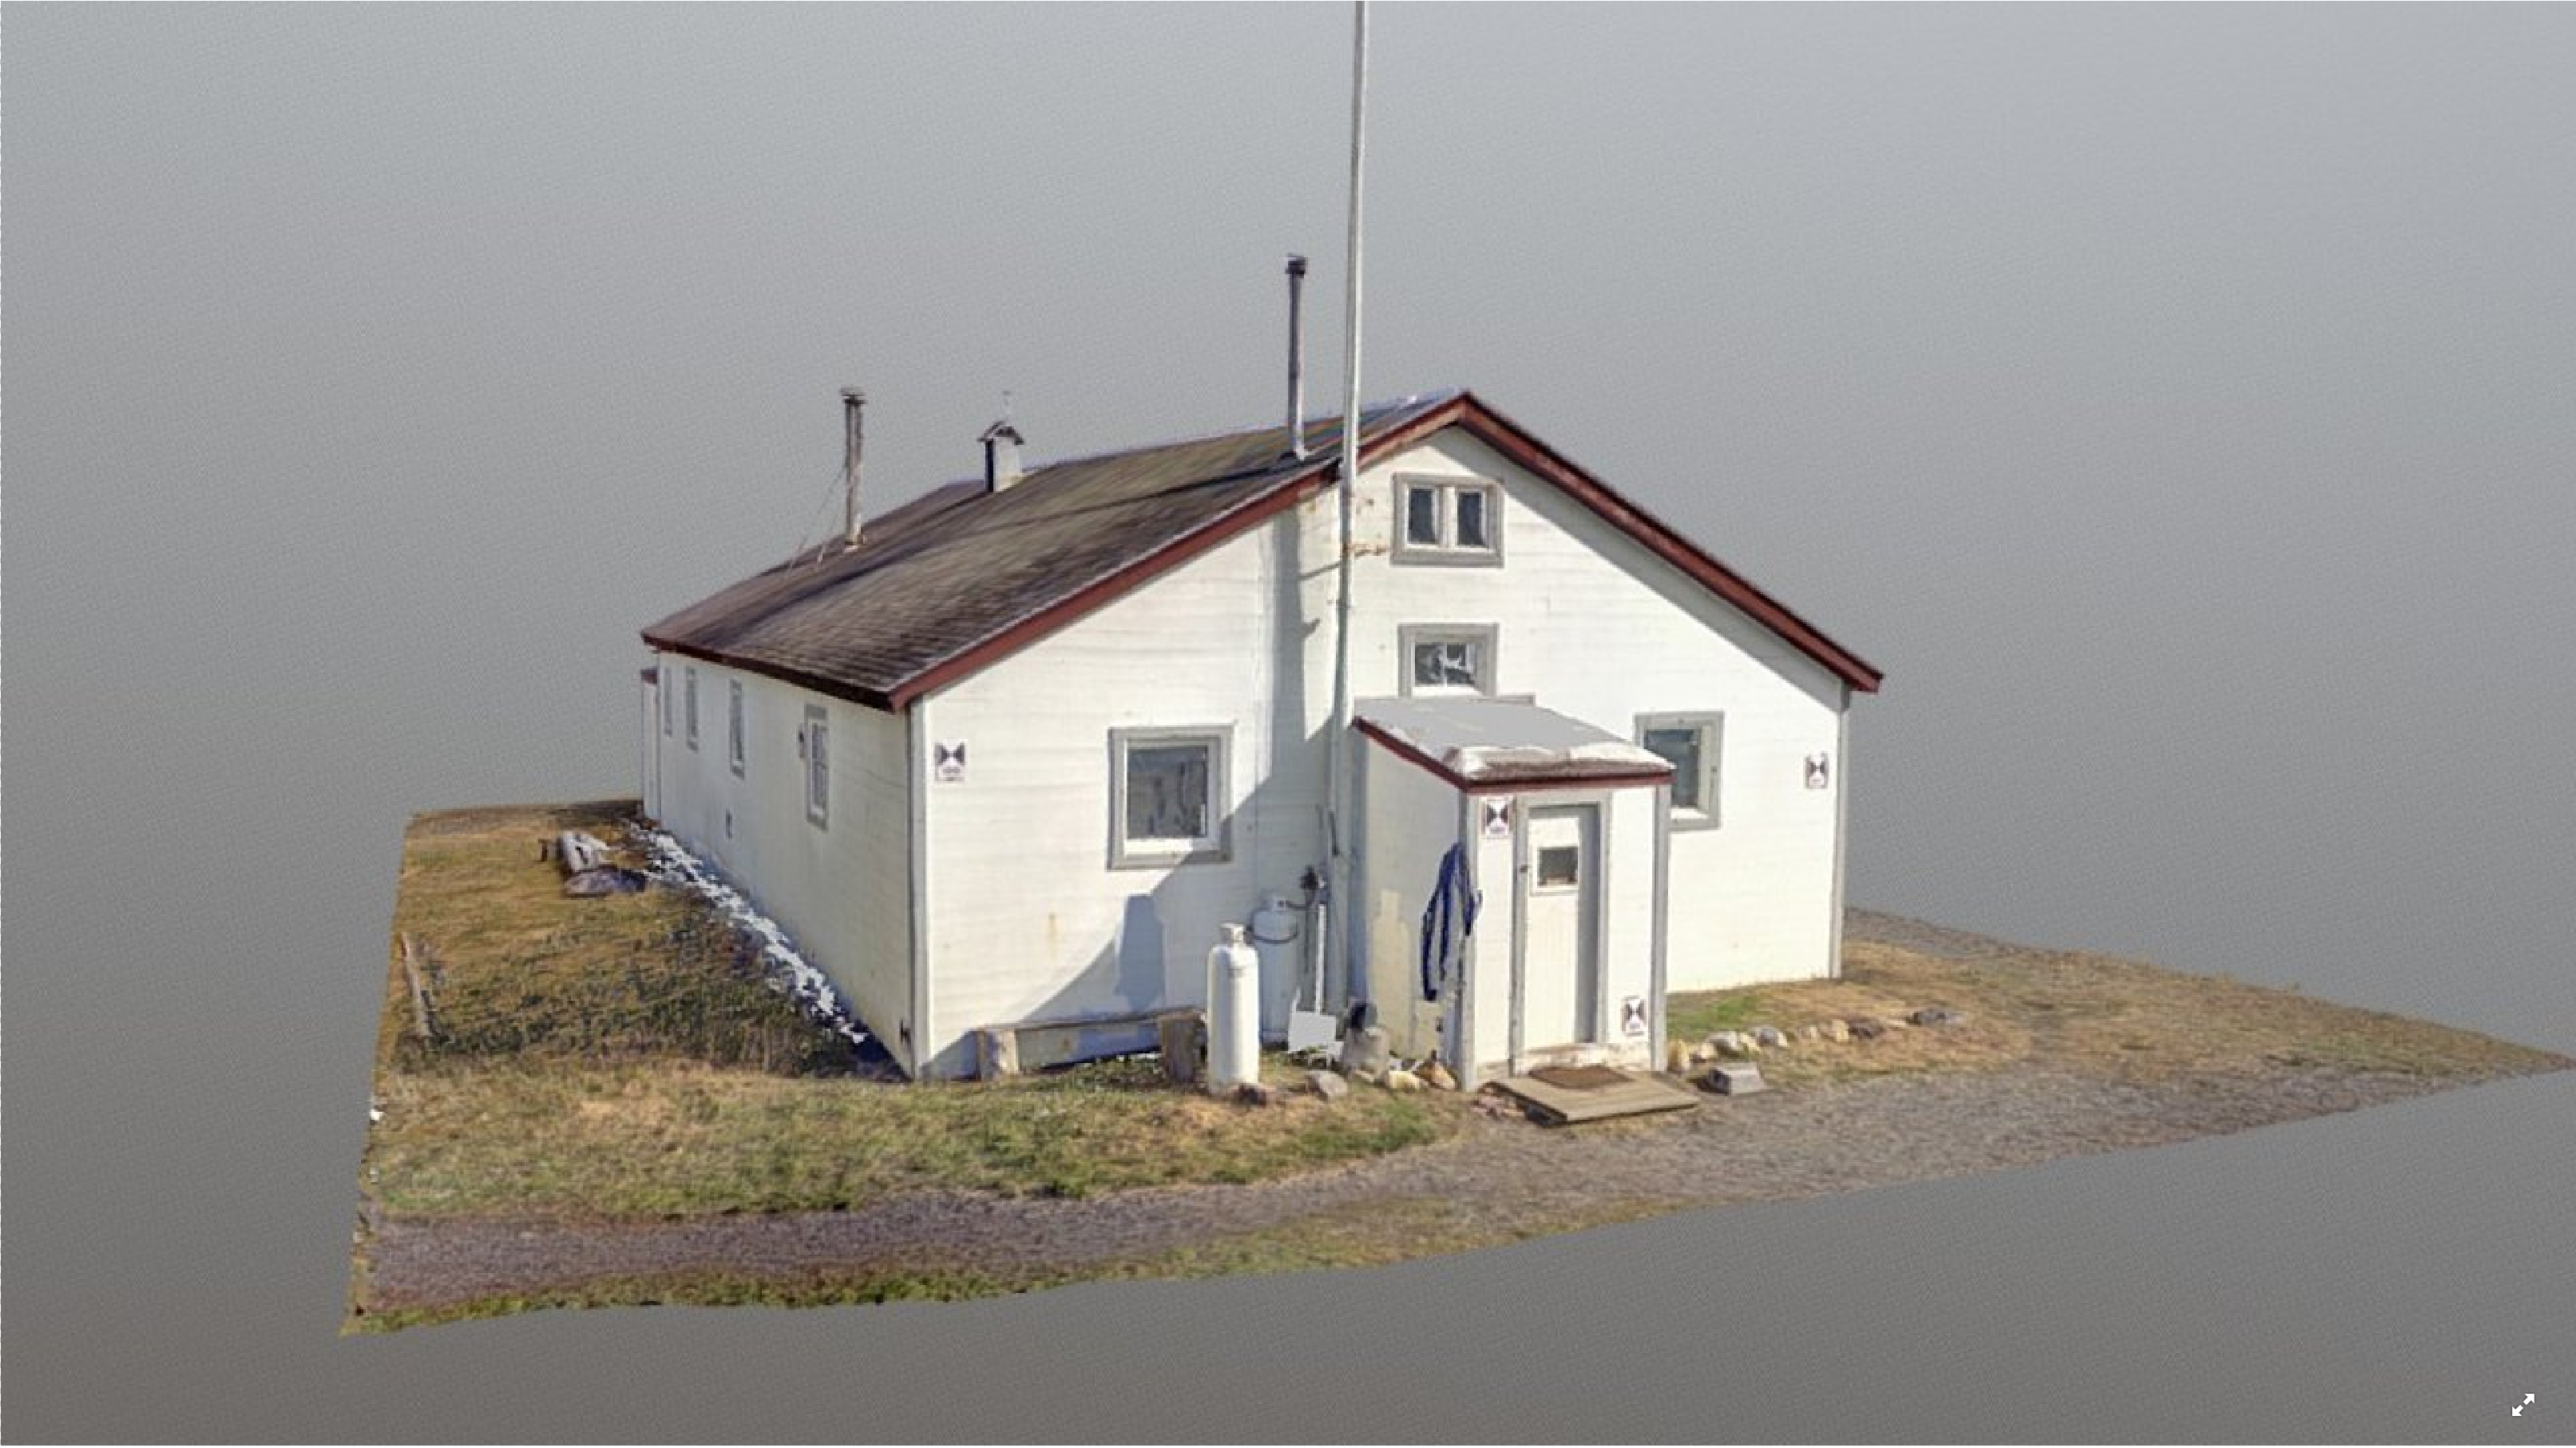 Model of the Community House produced from the terrestrial laser scanning capture, 2018. Photo source: Capture2Preserv project